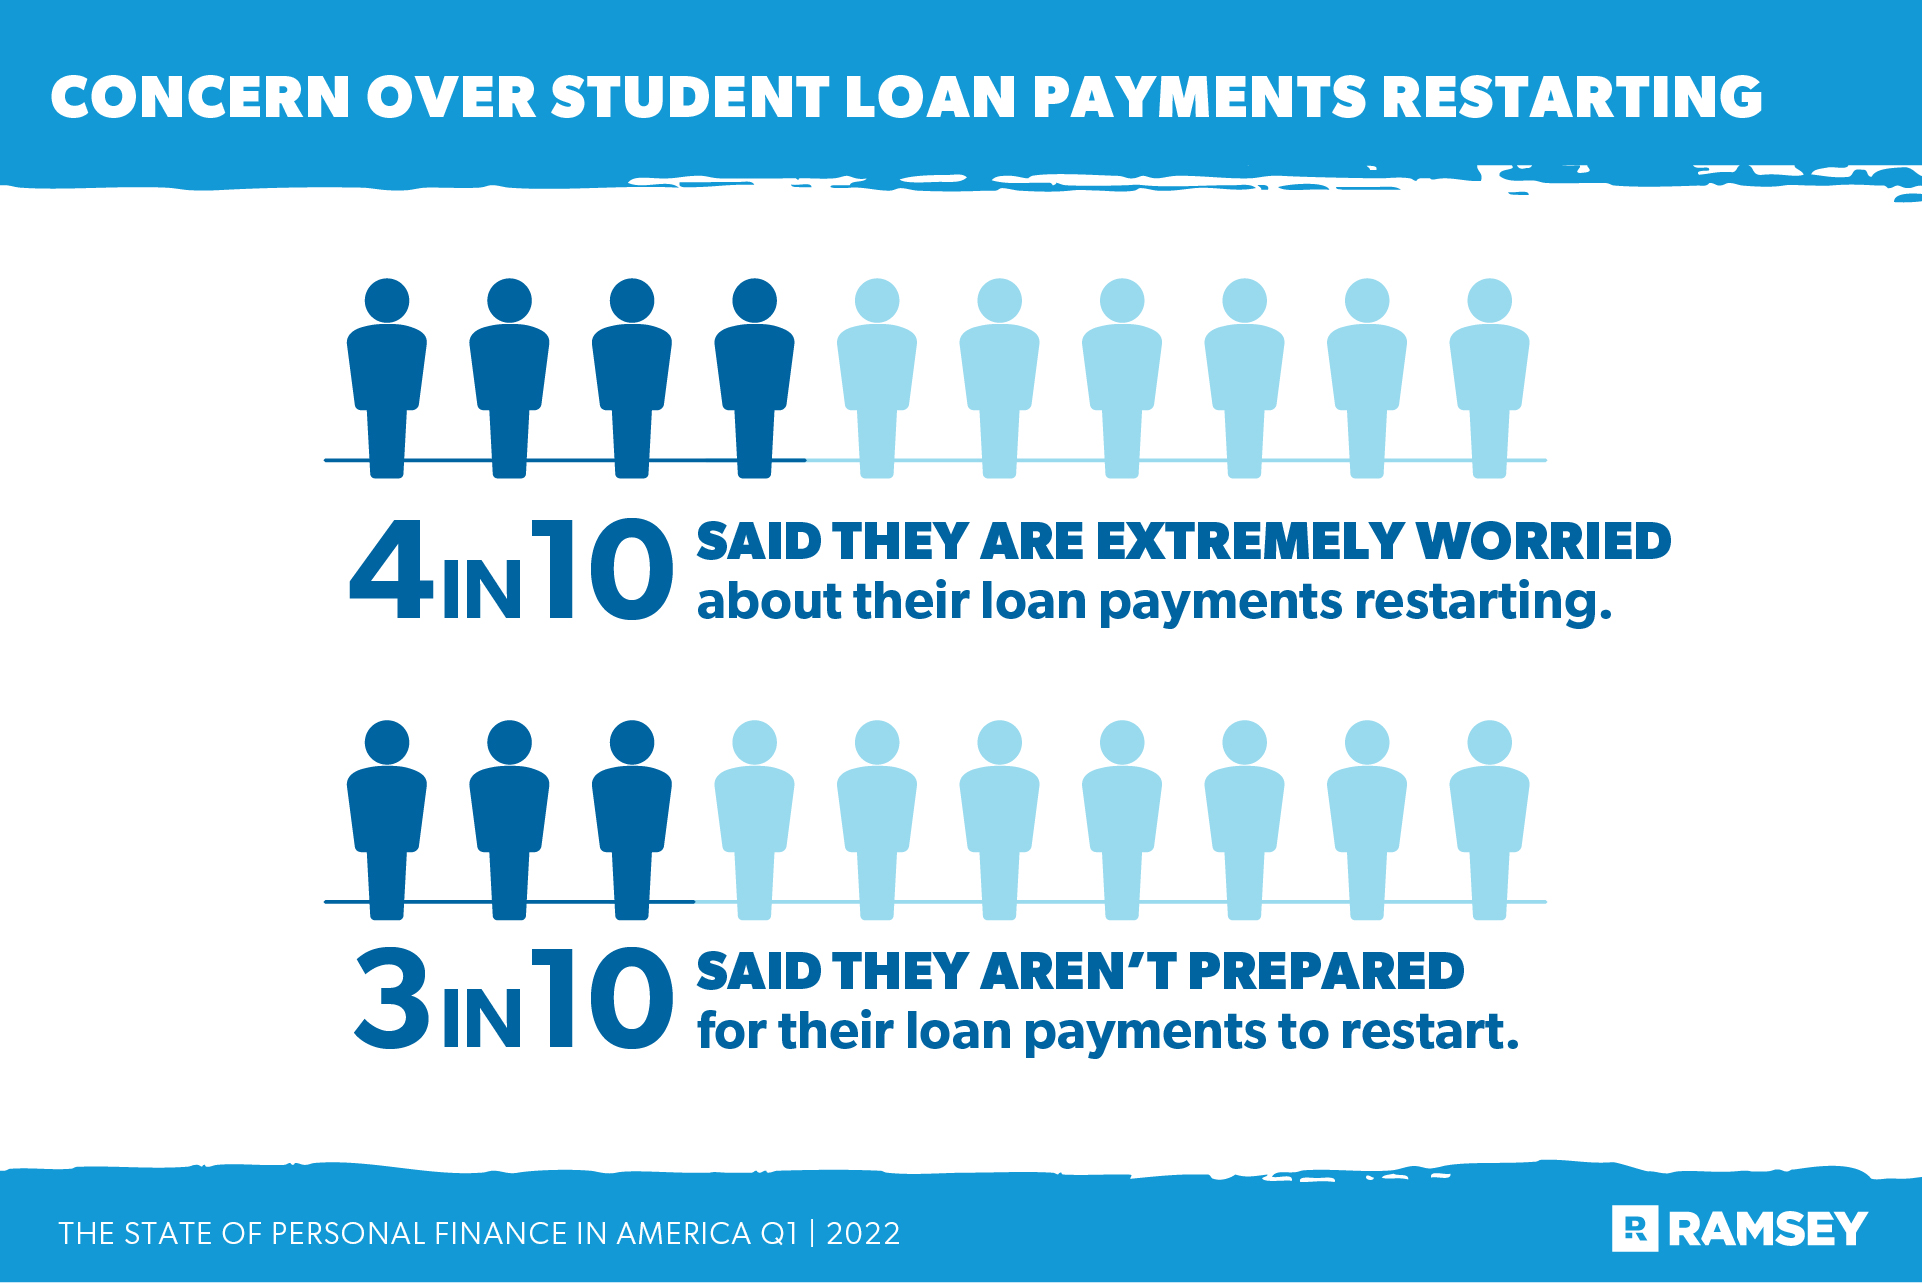 Concern over student loan payments restarting